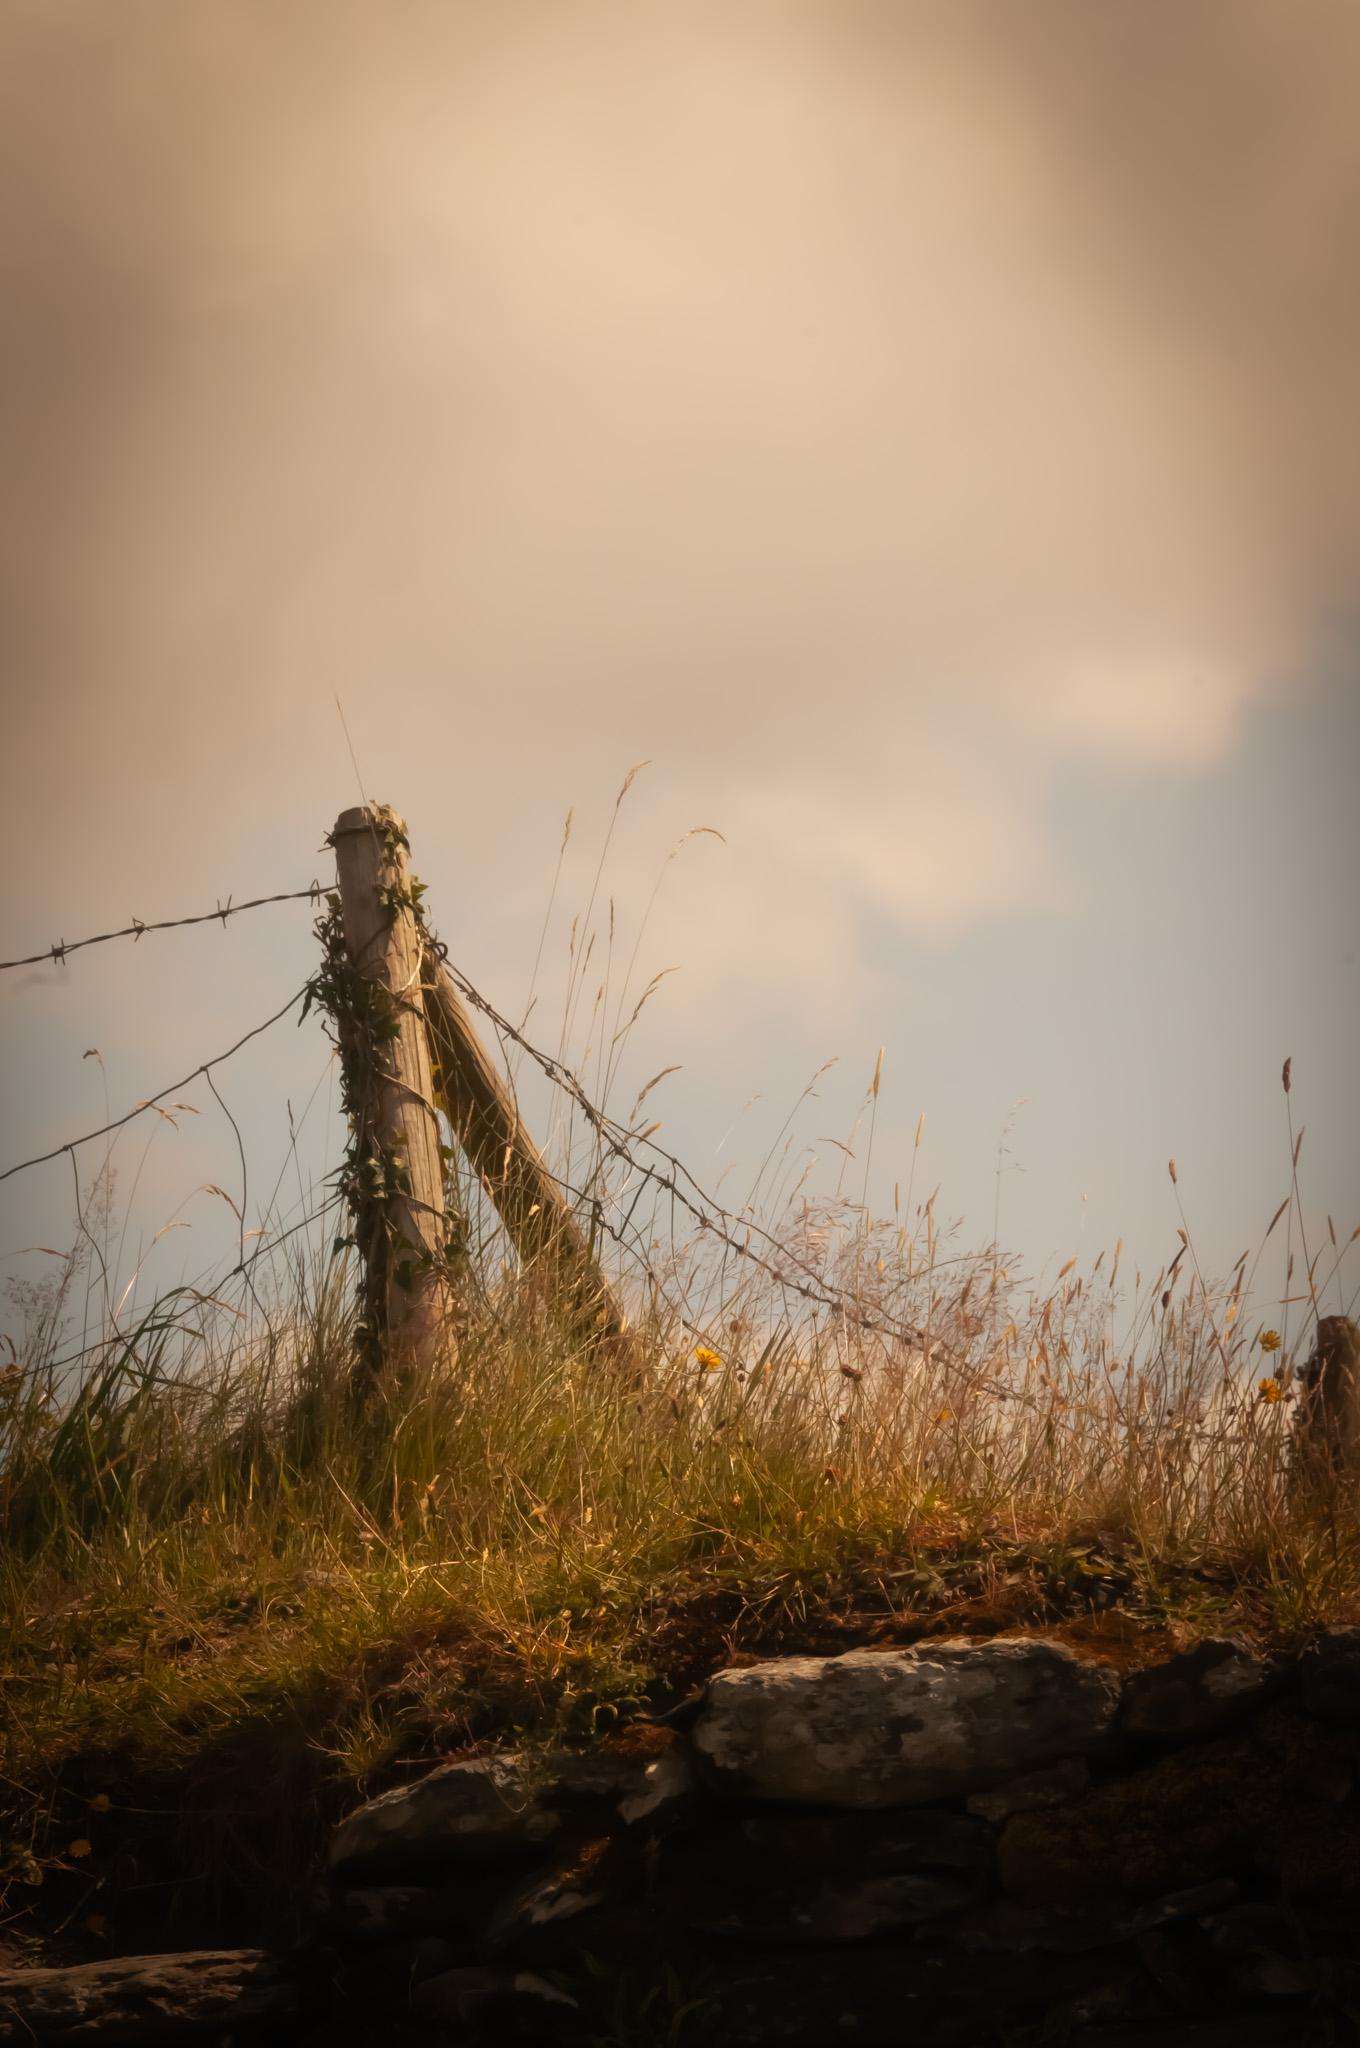 image showing ITAP of a fence post wrapped in barbed wire in Glendalough Ireland